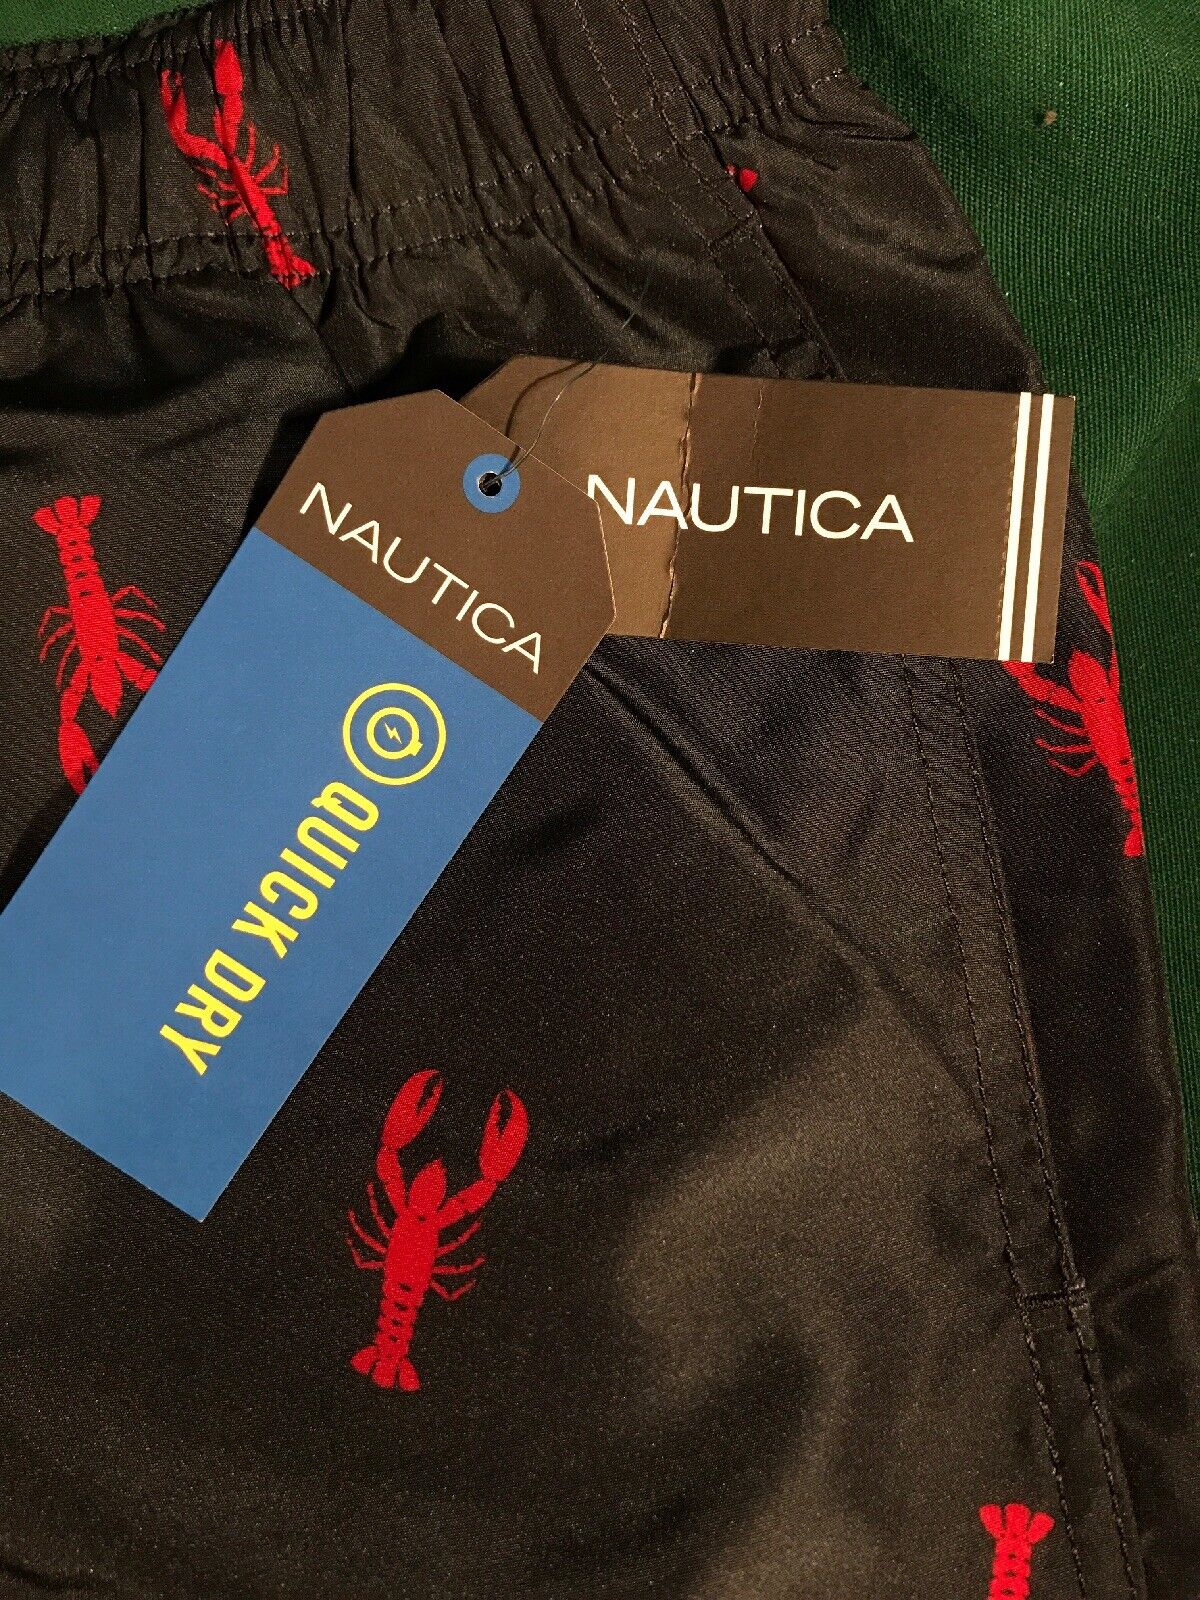 Nautica Men's L Navy Blue Red Lobster Nautical Quick Dry Bathing Suit trunks